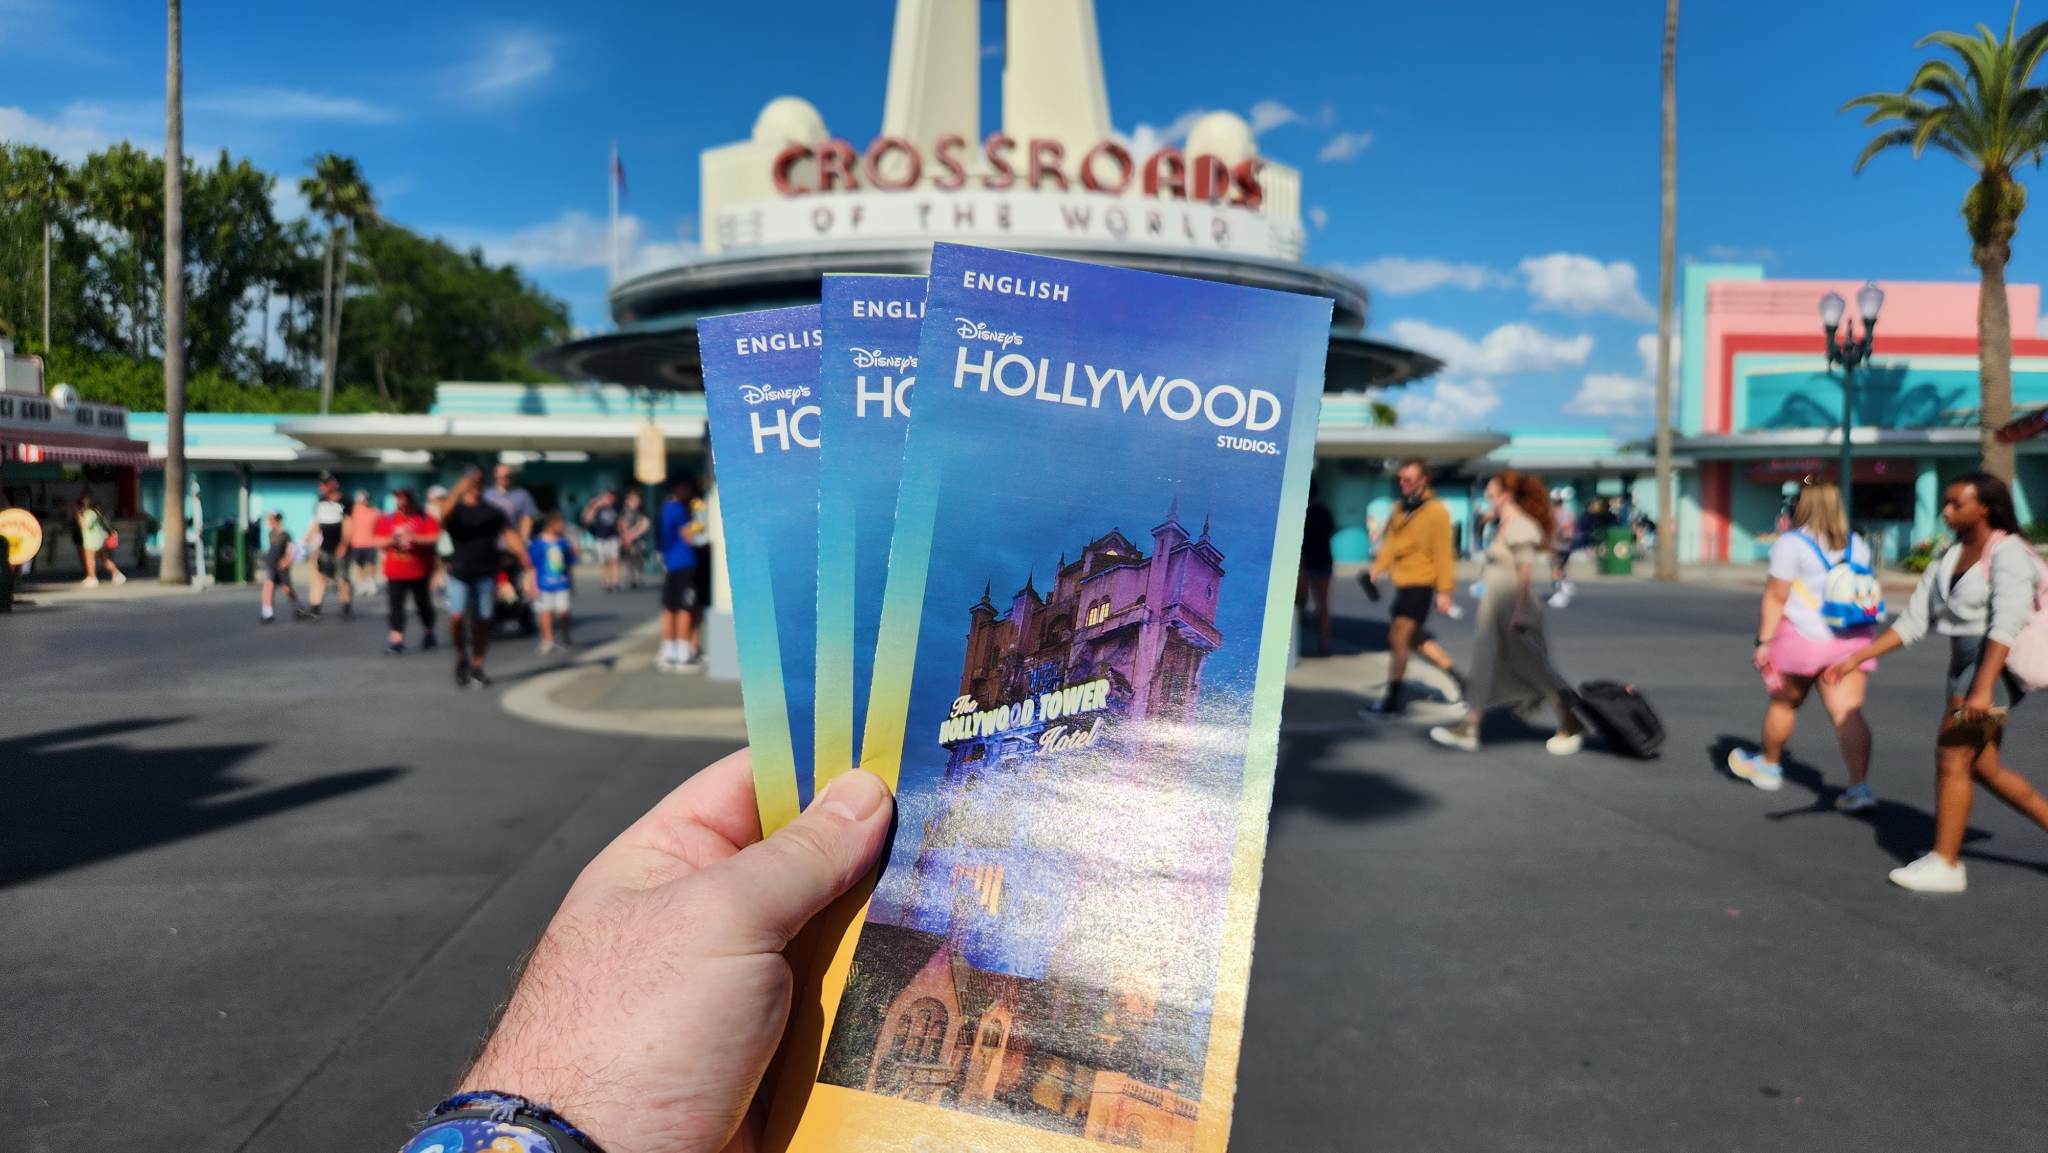 Hollywood Studios Park Map Removes Mention of Disney World 50th